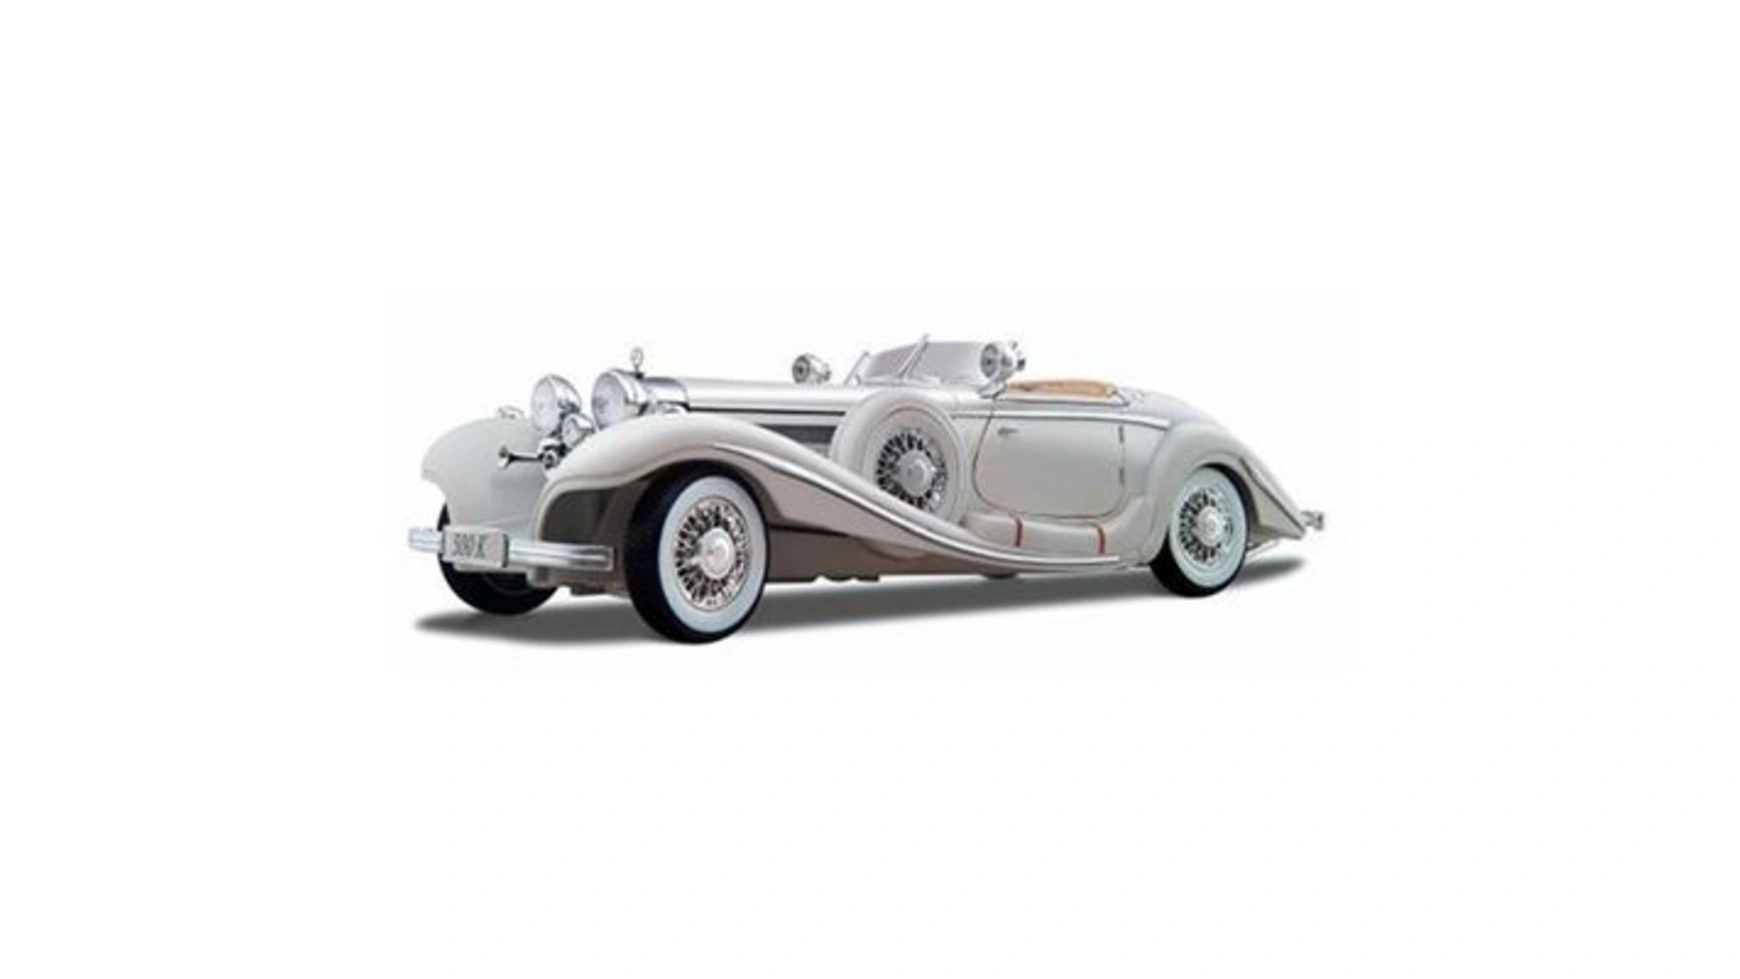 Maisto 1:18 Мерседес 500К Махараджа maisto 1 18 mercedes benz 500k purple classic car simulation alloy car model collection decoration gifts toy